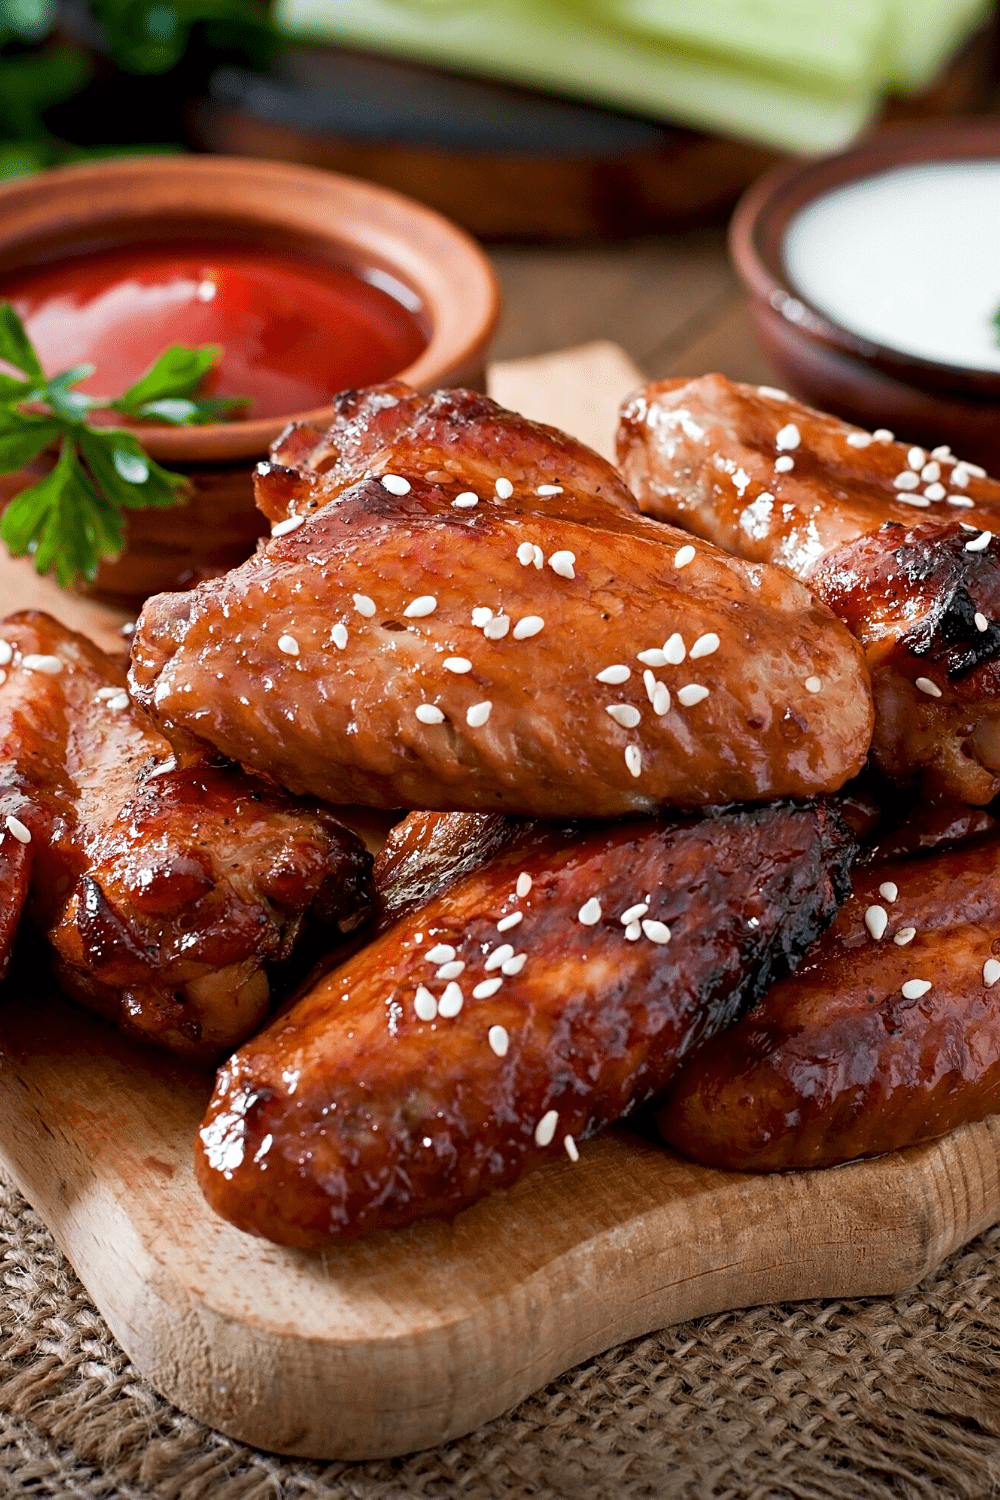 How long to bake chicken wings?